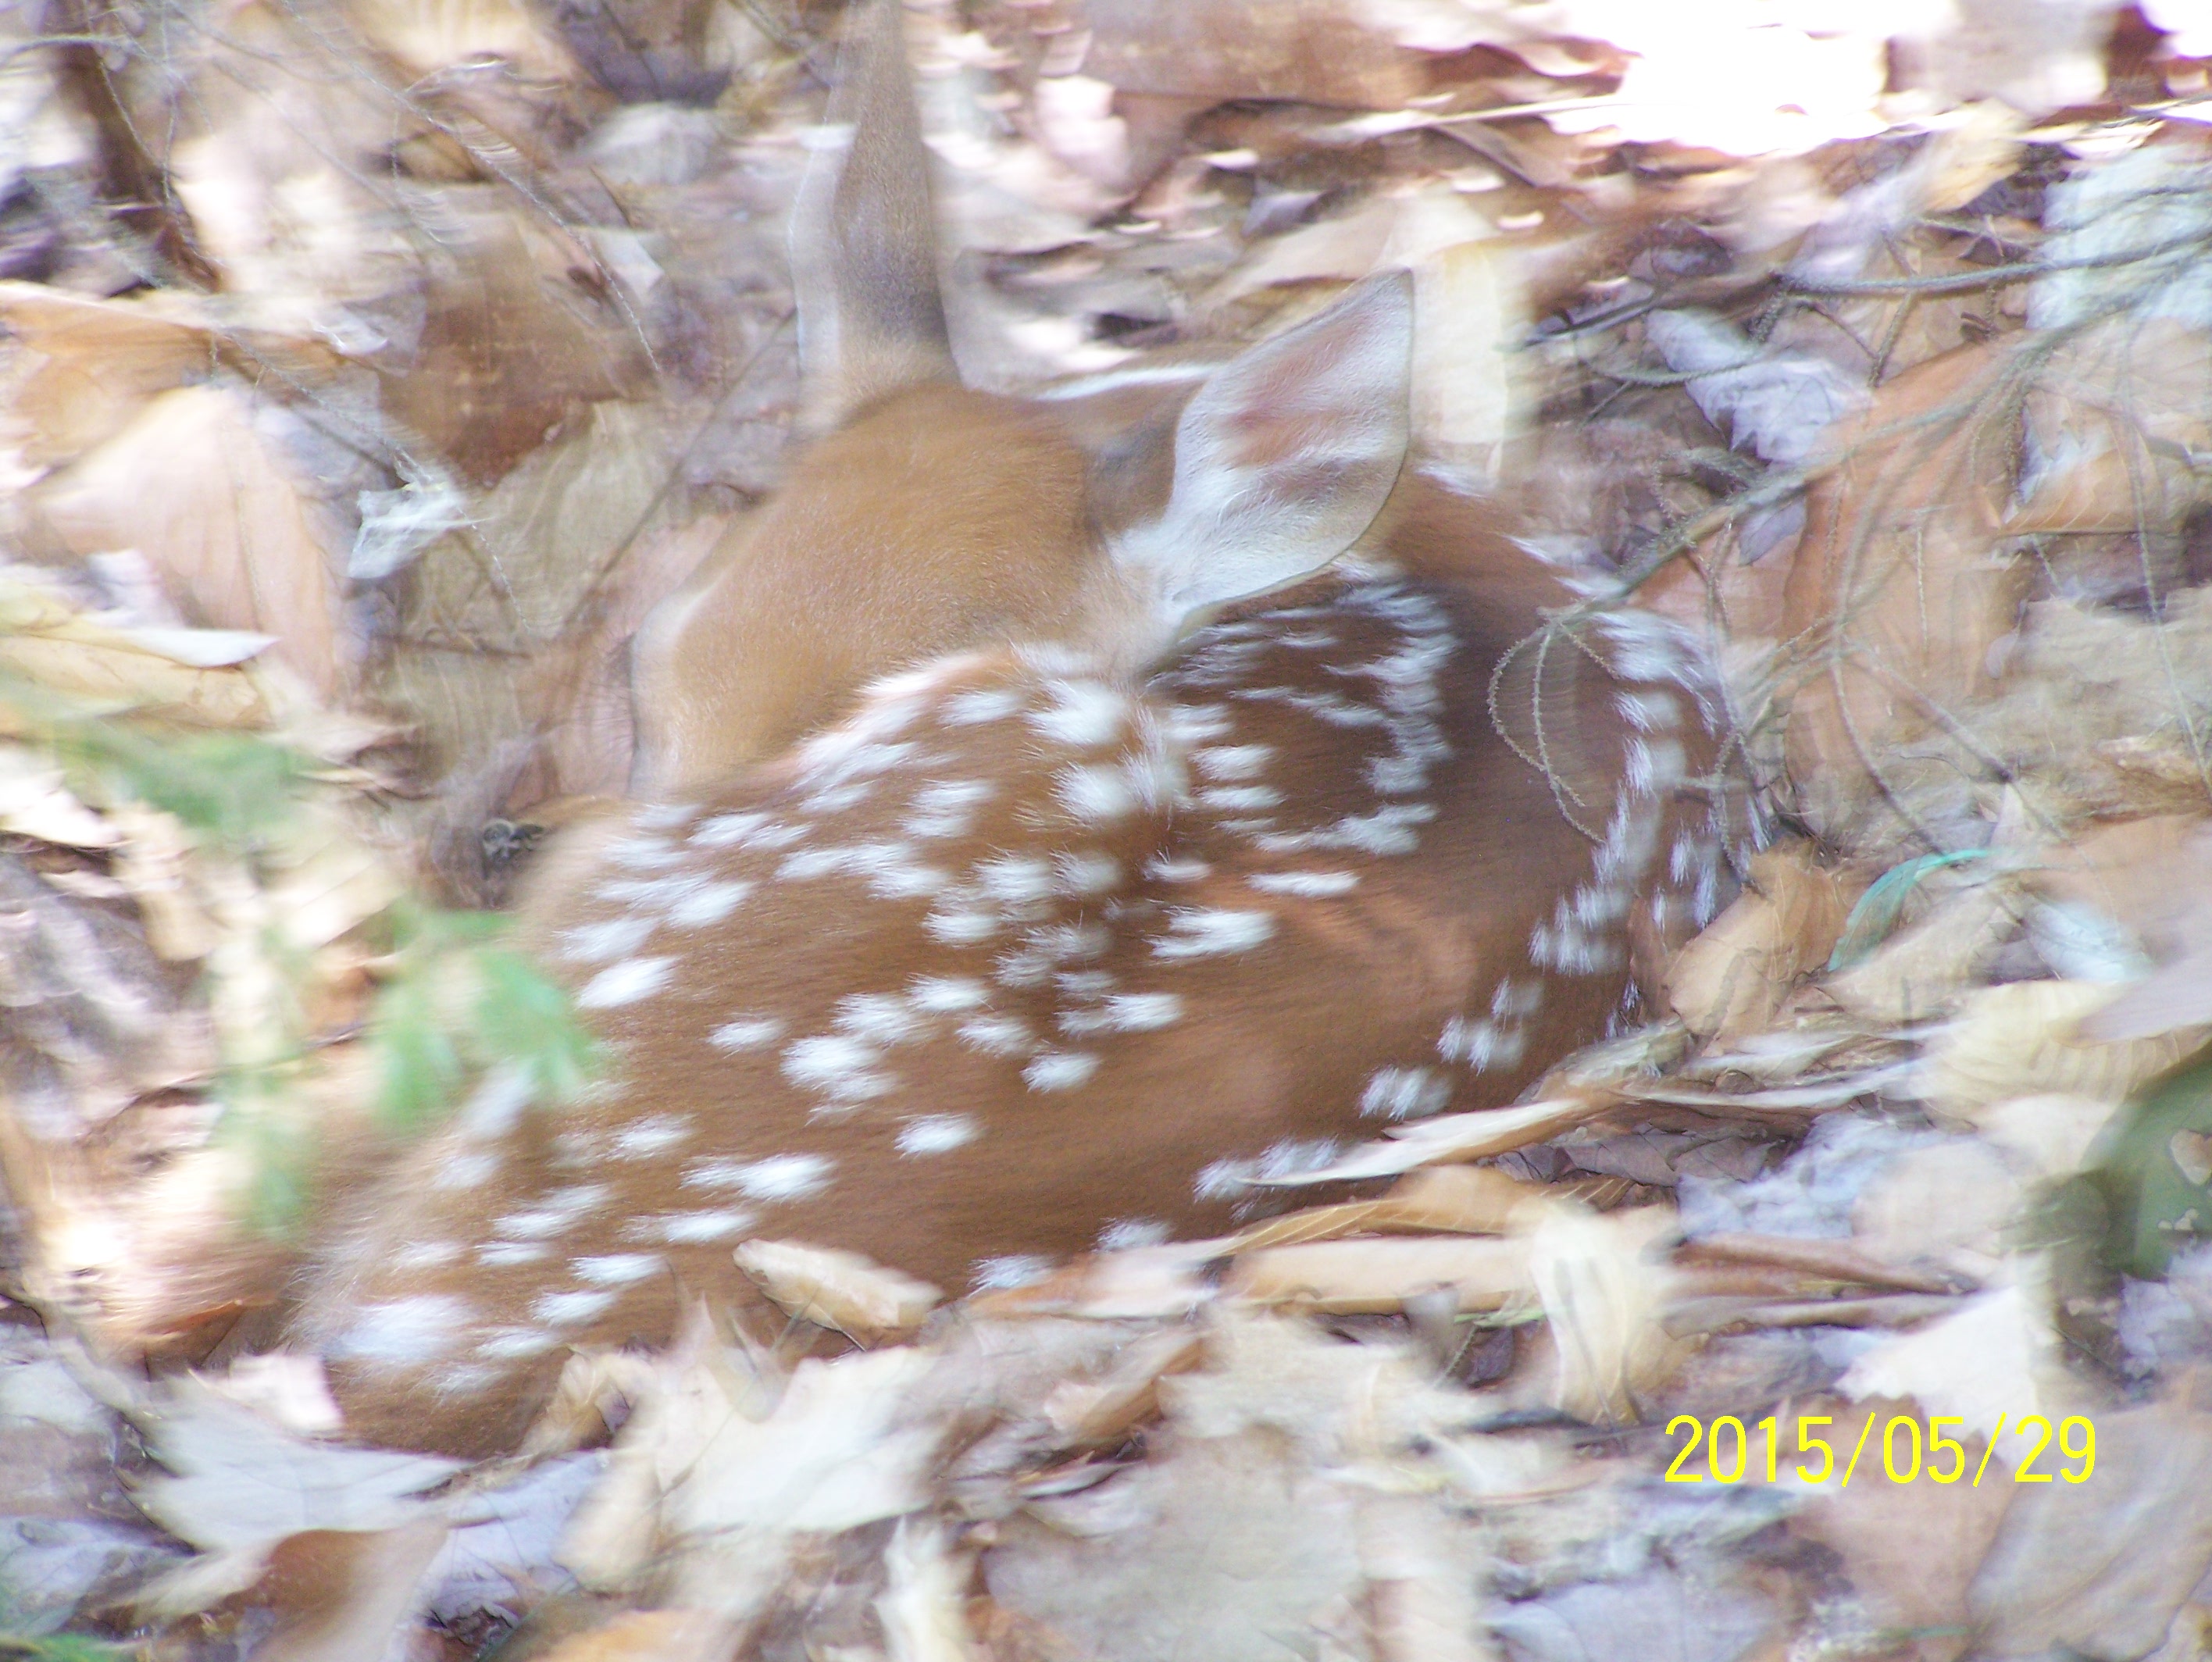 Look what we found in our yard today...a day old fawn...